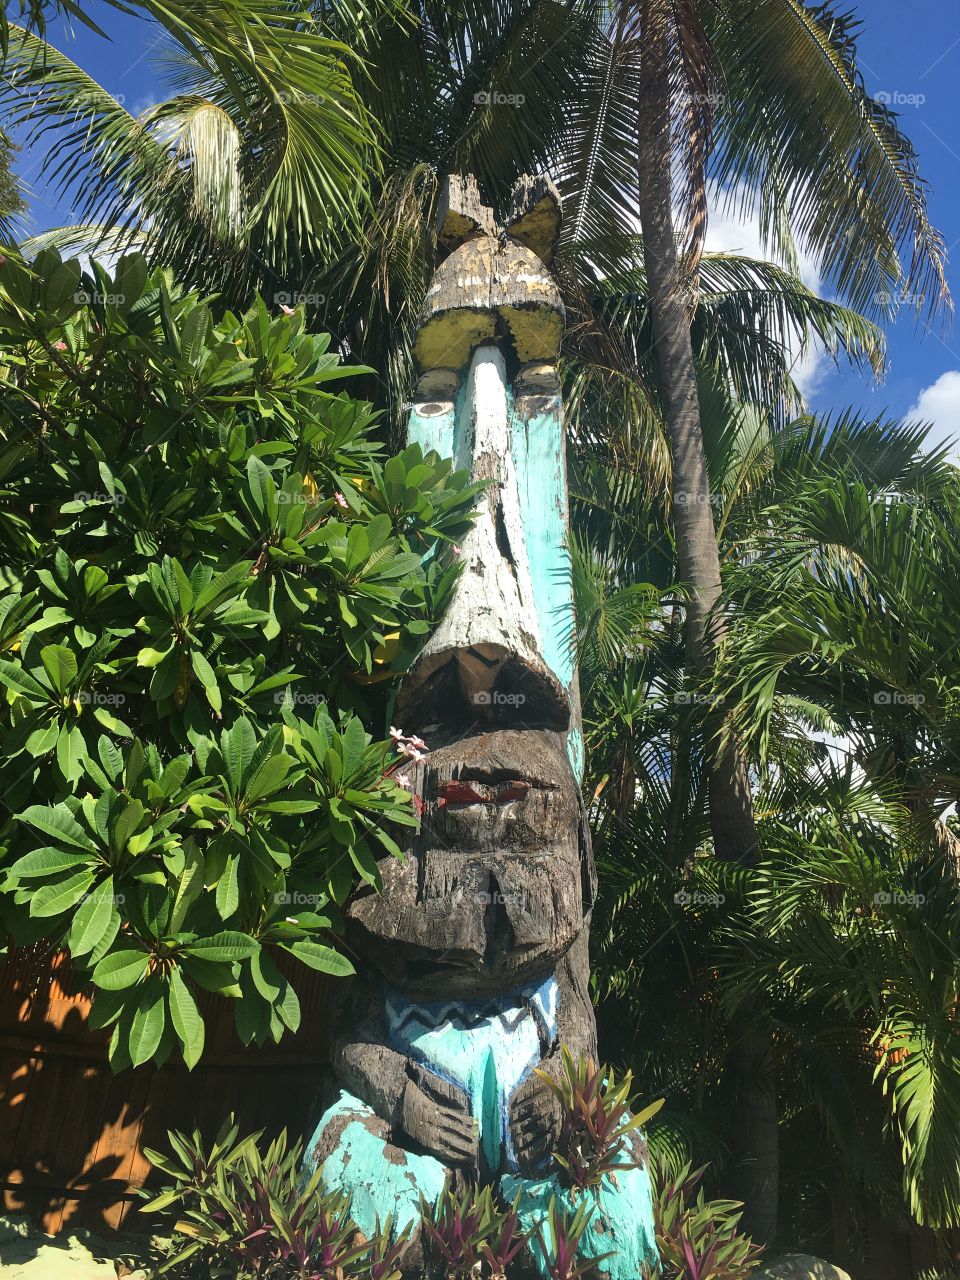 Barney Wedt Tiki at the Mai-Kai in Ft Lauderdale, FL